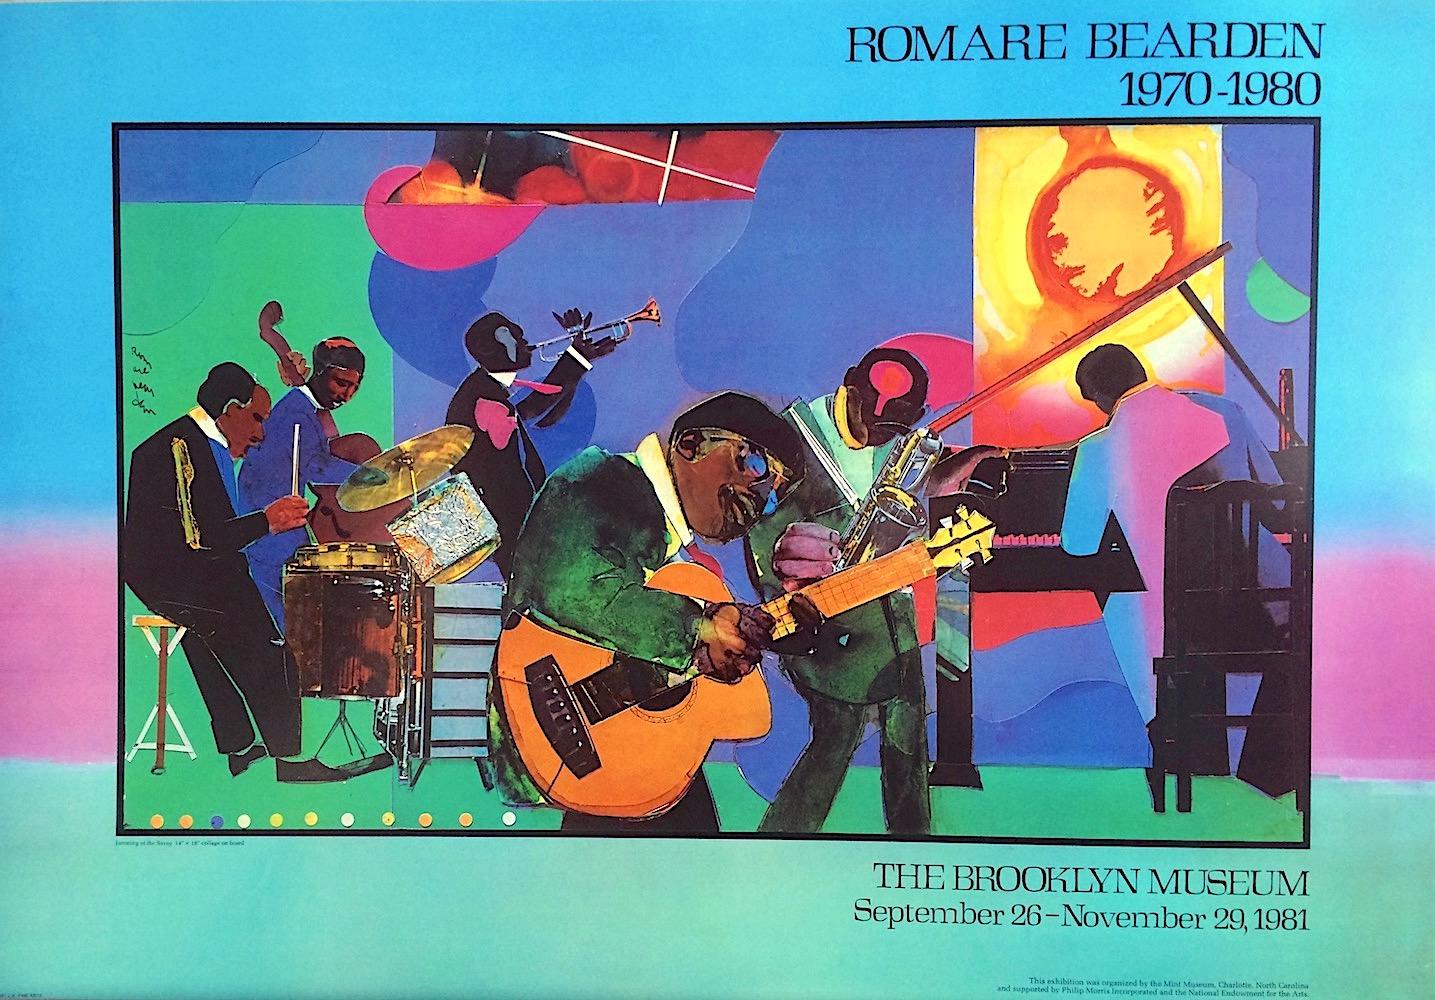 ROMARE BEARDEN 1970-1980
The Brooklyn Museum, September 26-November 29, 1981
Exhibition Poster "Jamming At The Savoy" (image from original 14" x 18" collage on board by Bearden)
22 x 31.5 inches, unframed
Poster is not signed.

Jamming At The Savoy